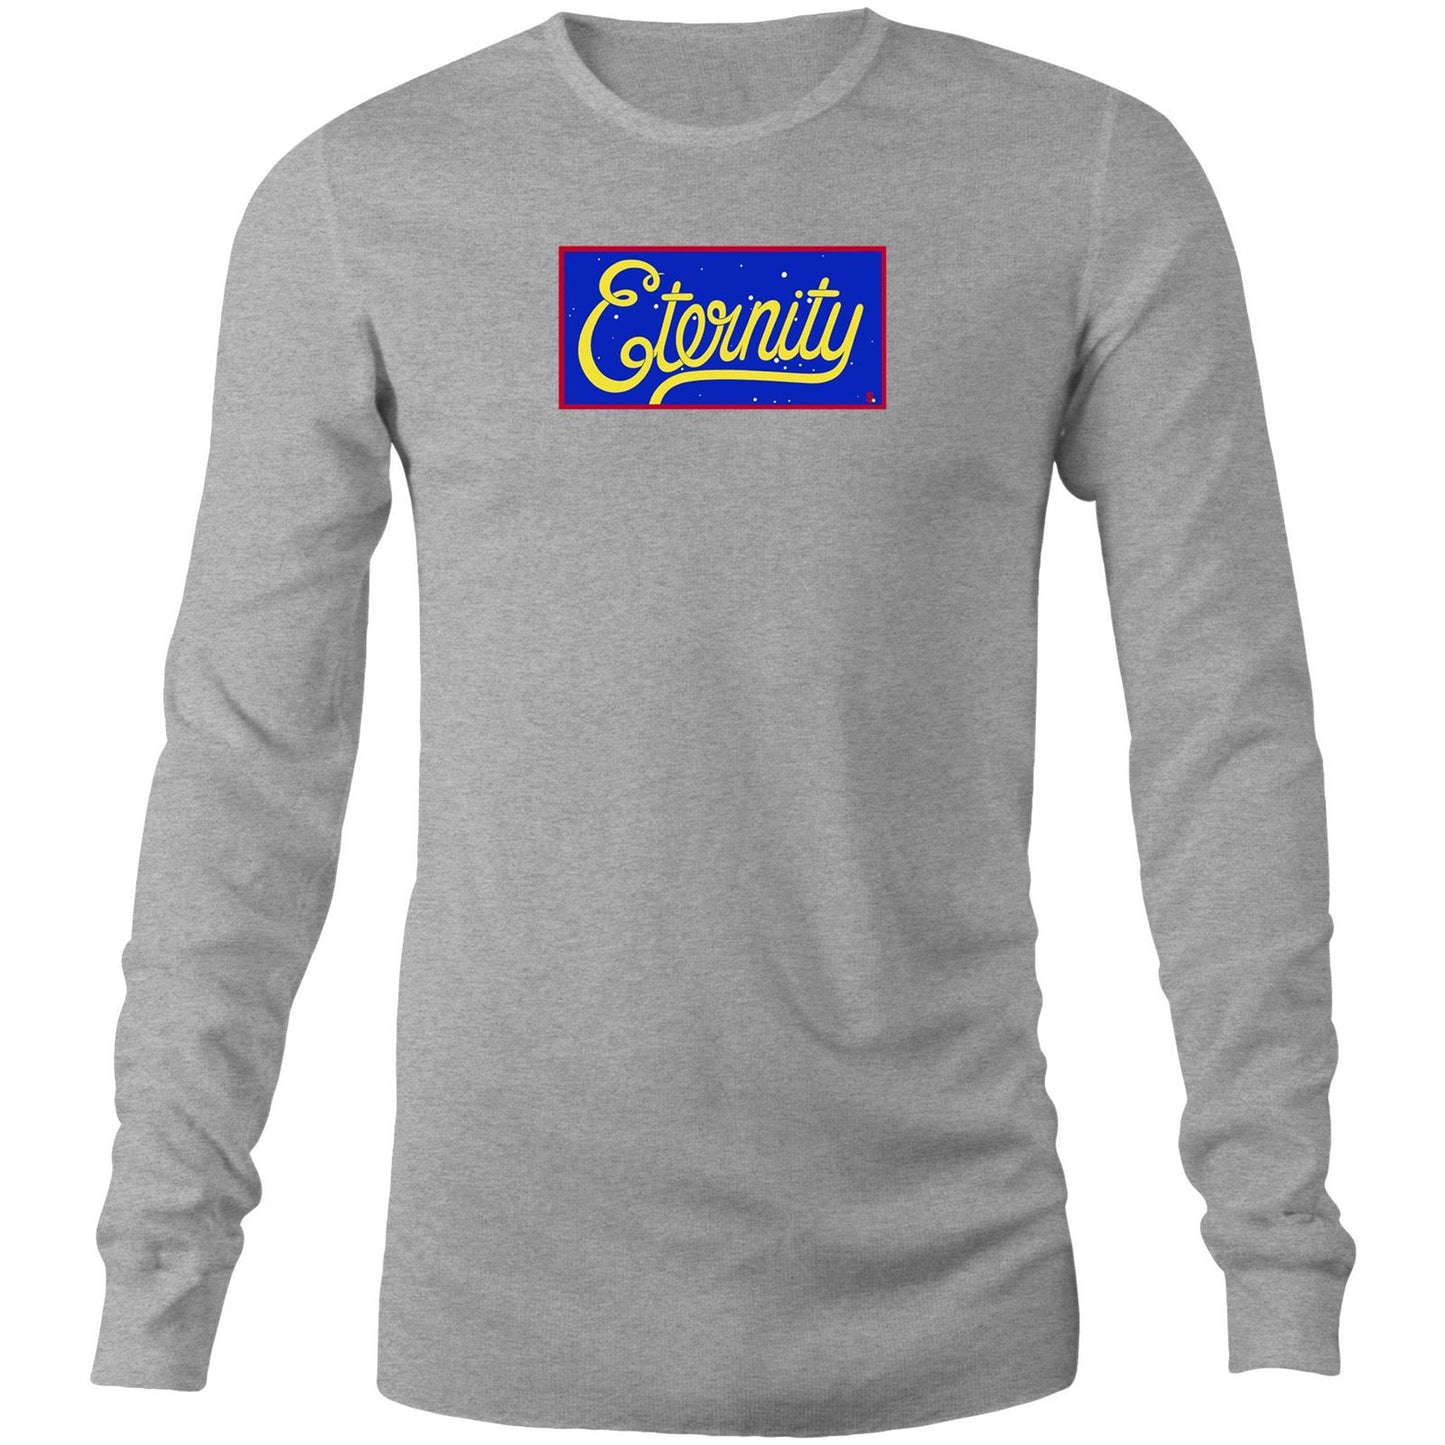 Eternity at REMO Long Sleeve T-Shirts